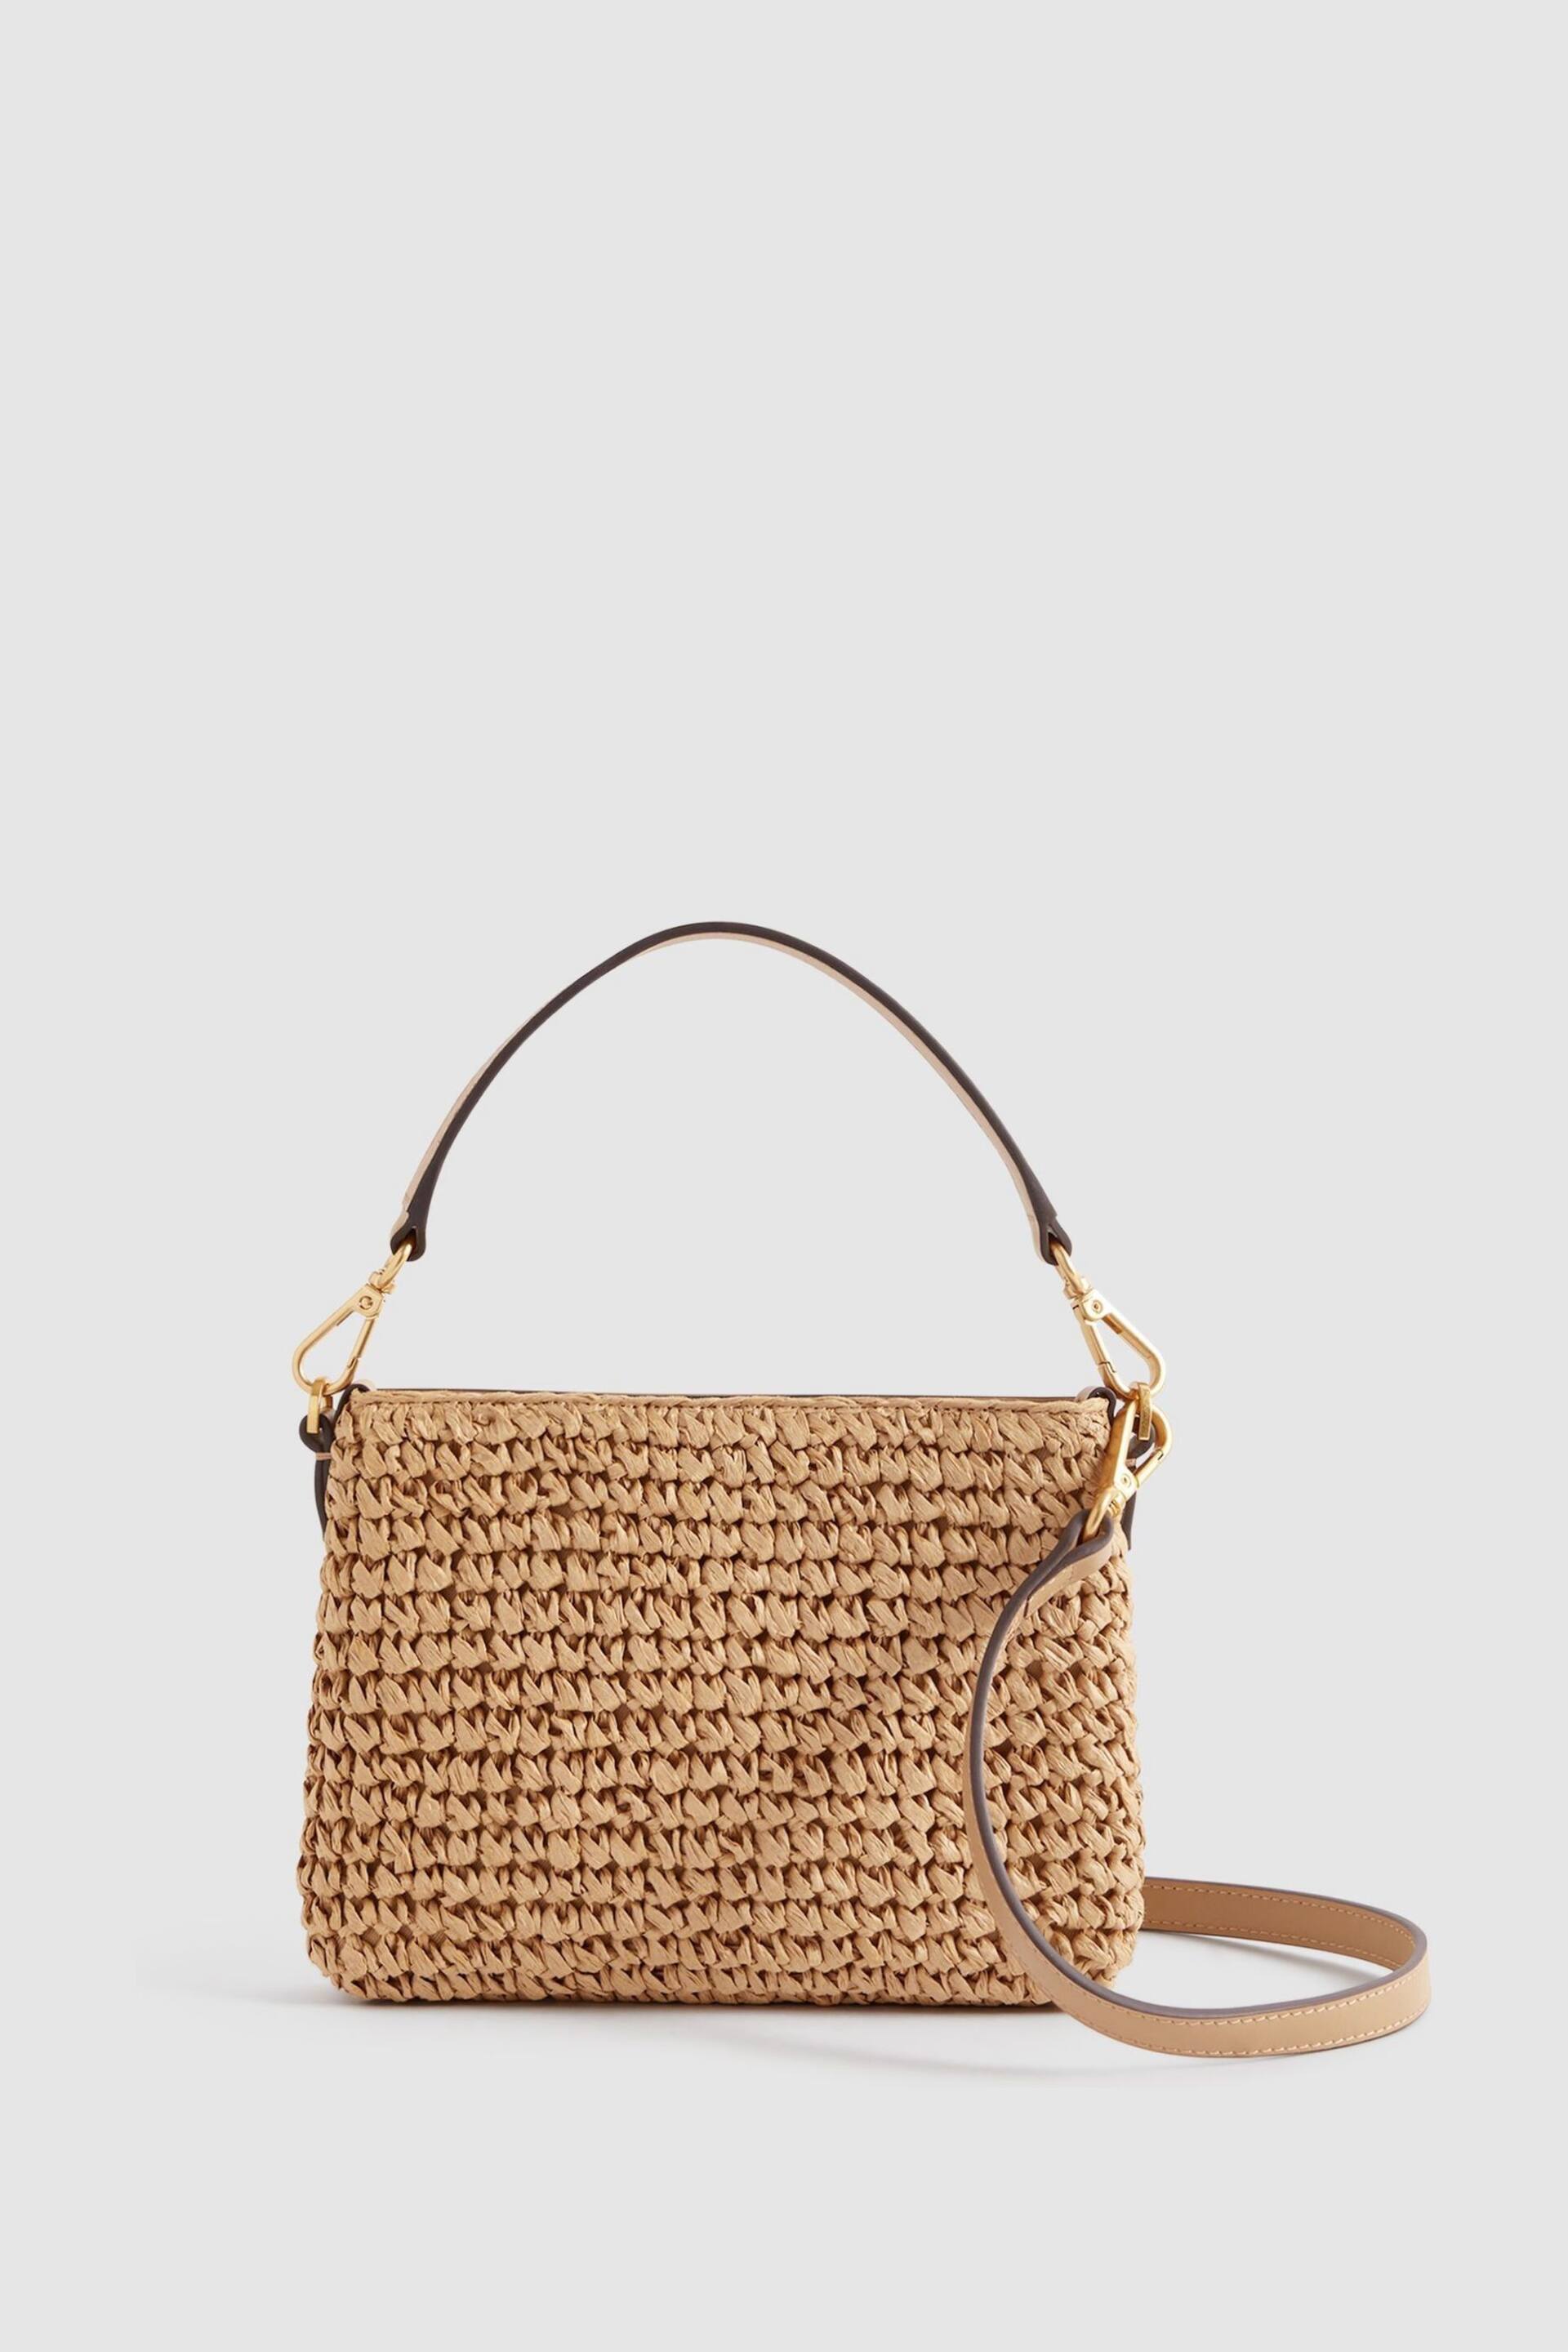 Reiss Tan Brompton Leather Raffia Pouch Bag - Image 1 of 6